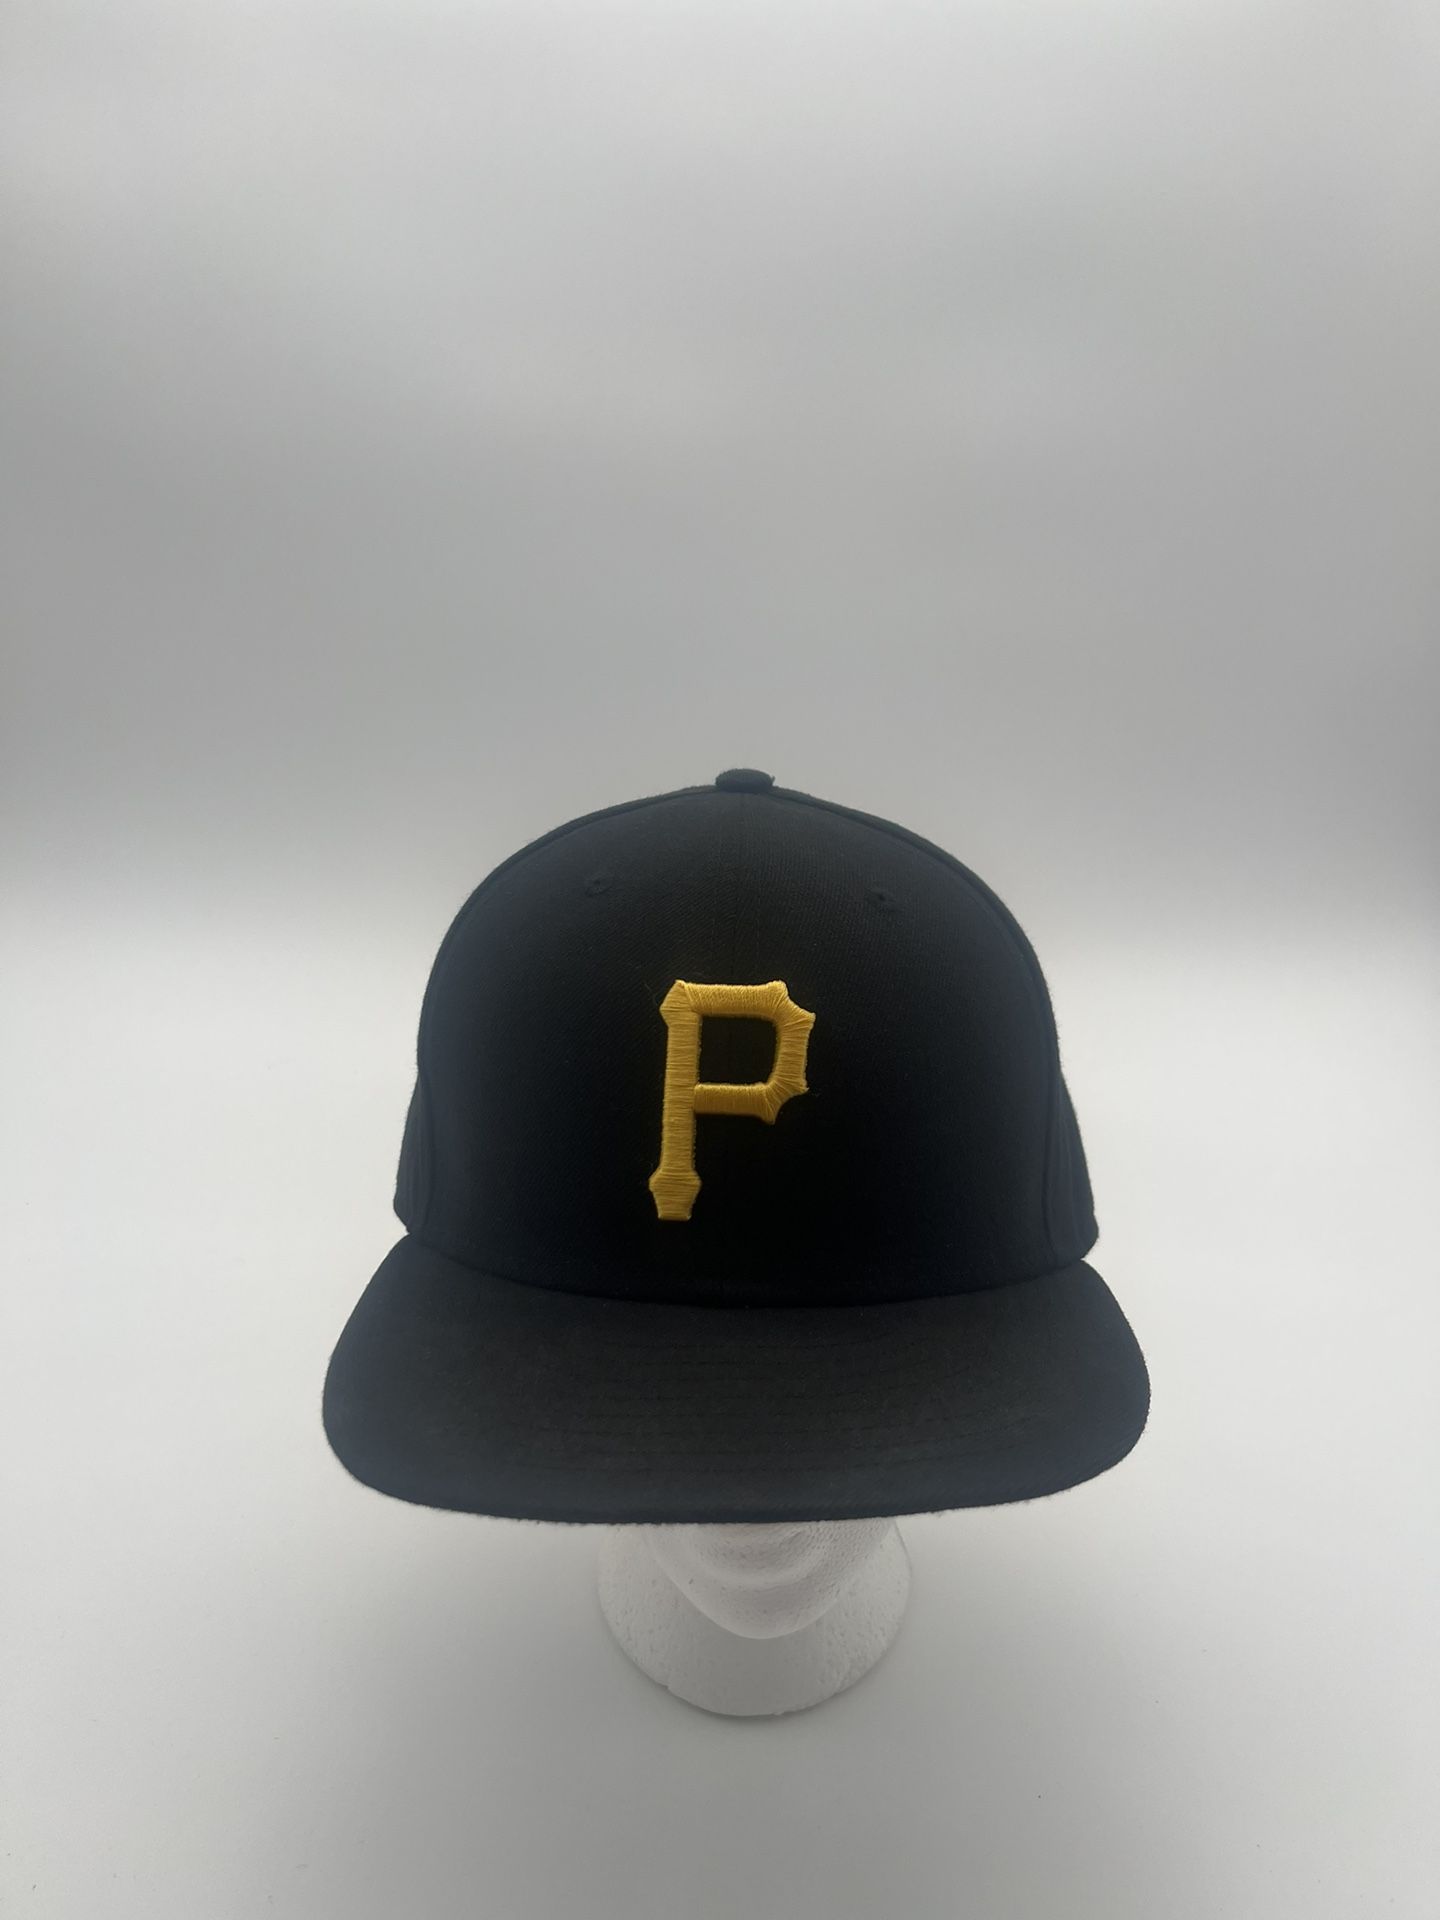 (36) Pittsburg Black And Yellow Hat Size 7 1/4 